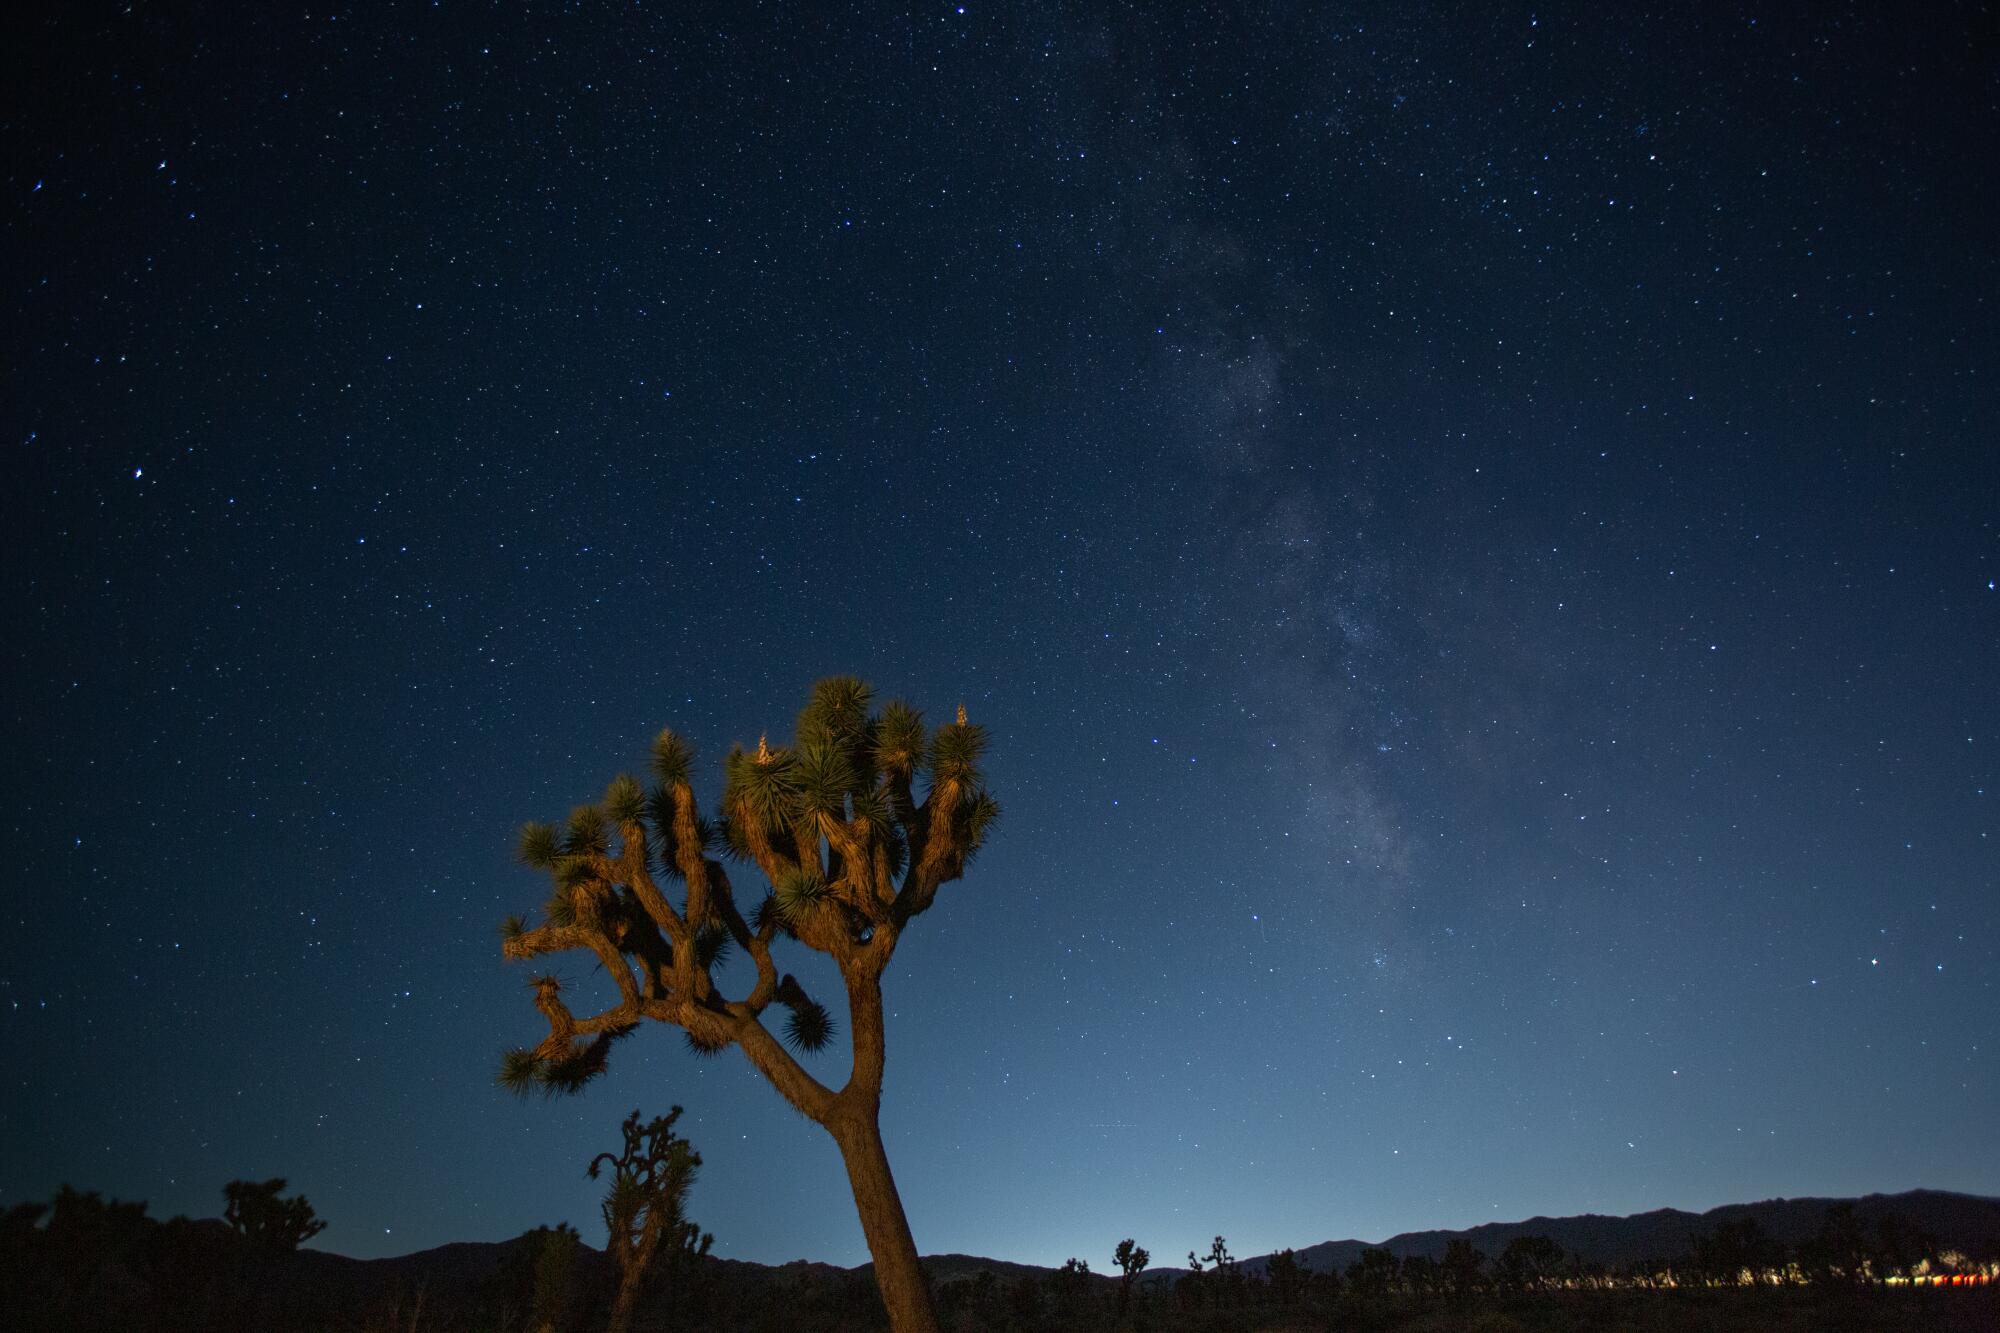 Joshua Tree during a dark sky photography workshop, led by the Desert Institute.